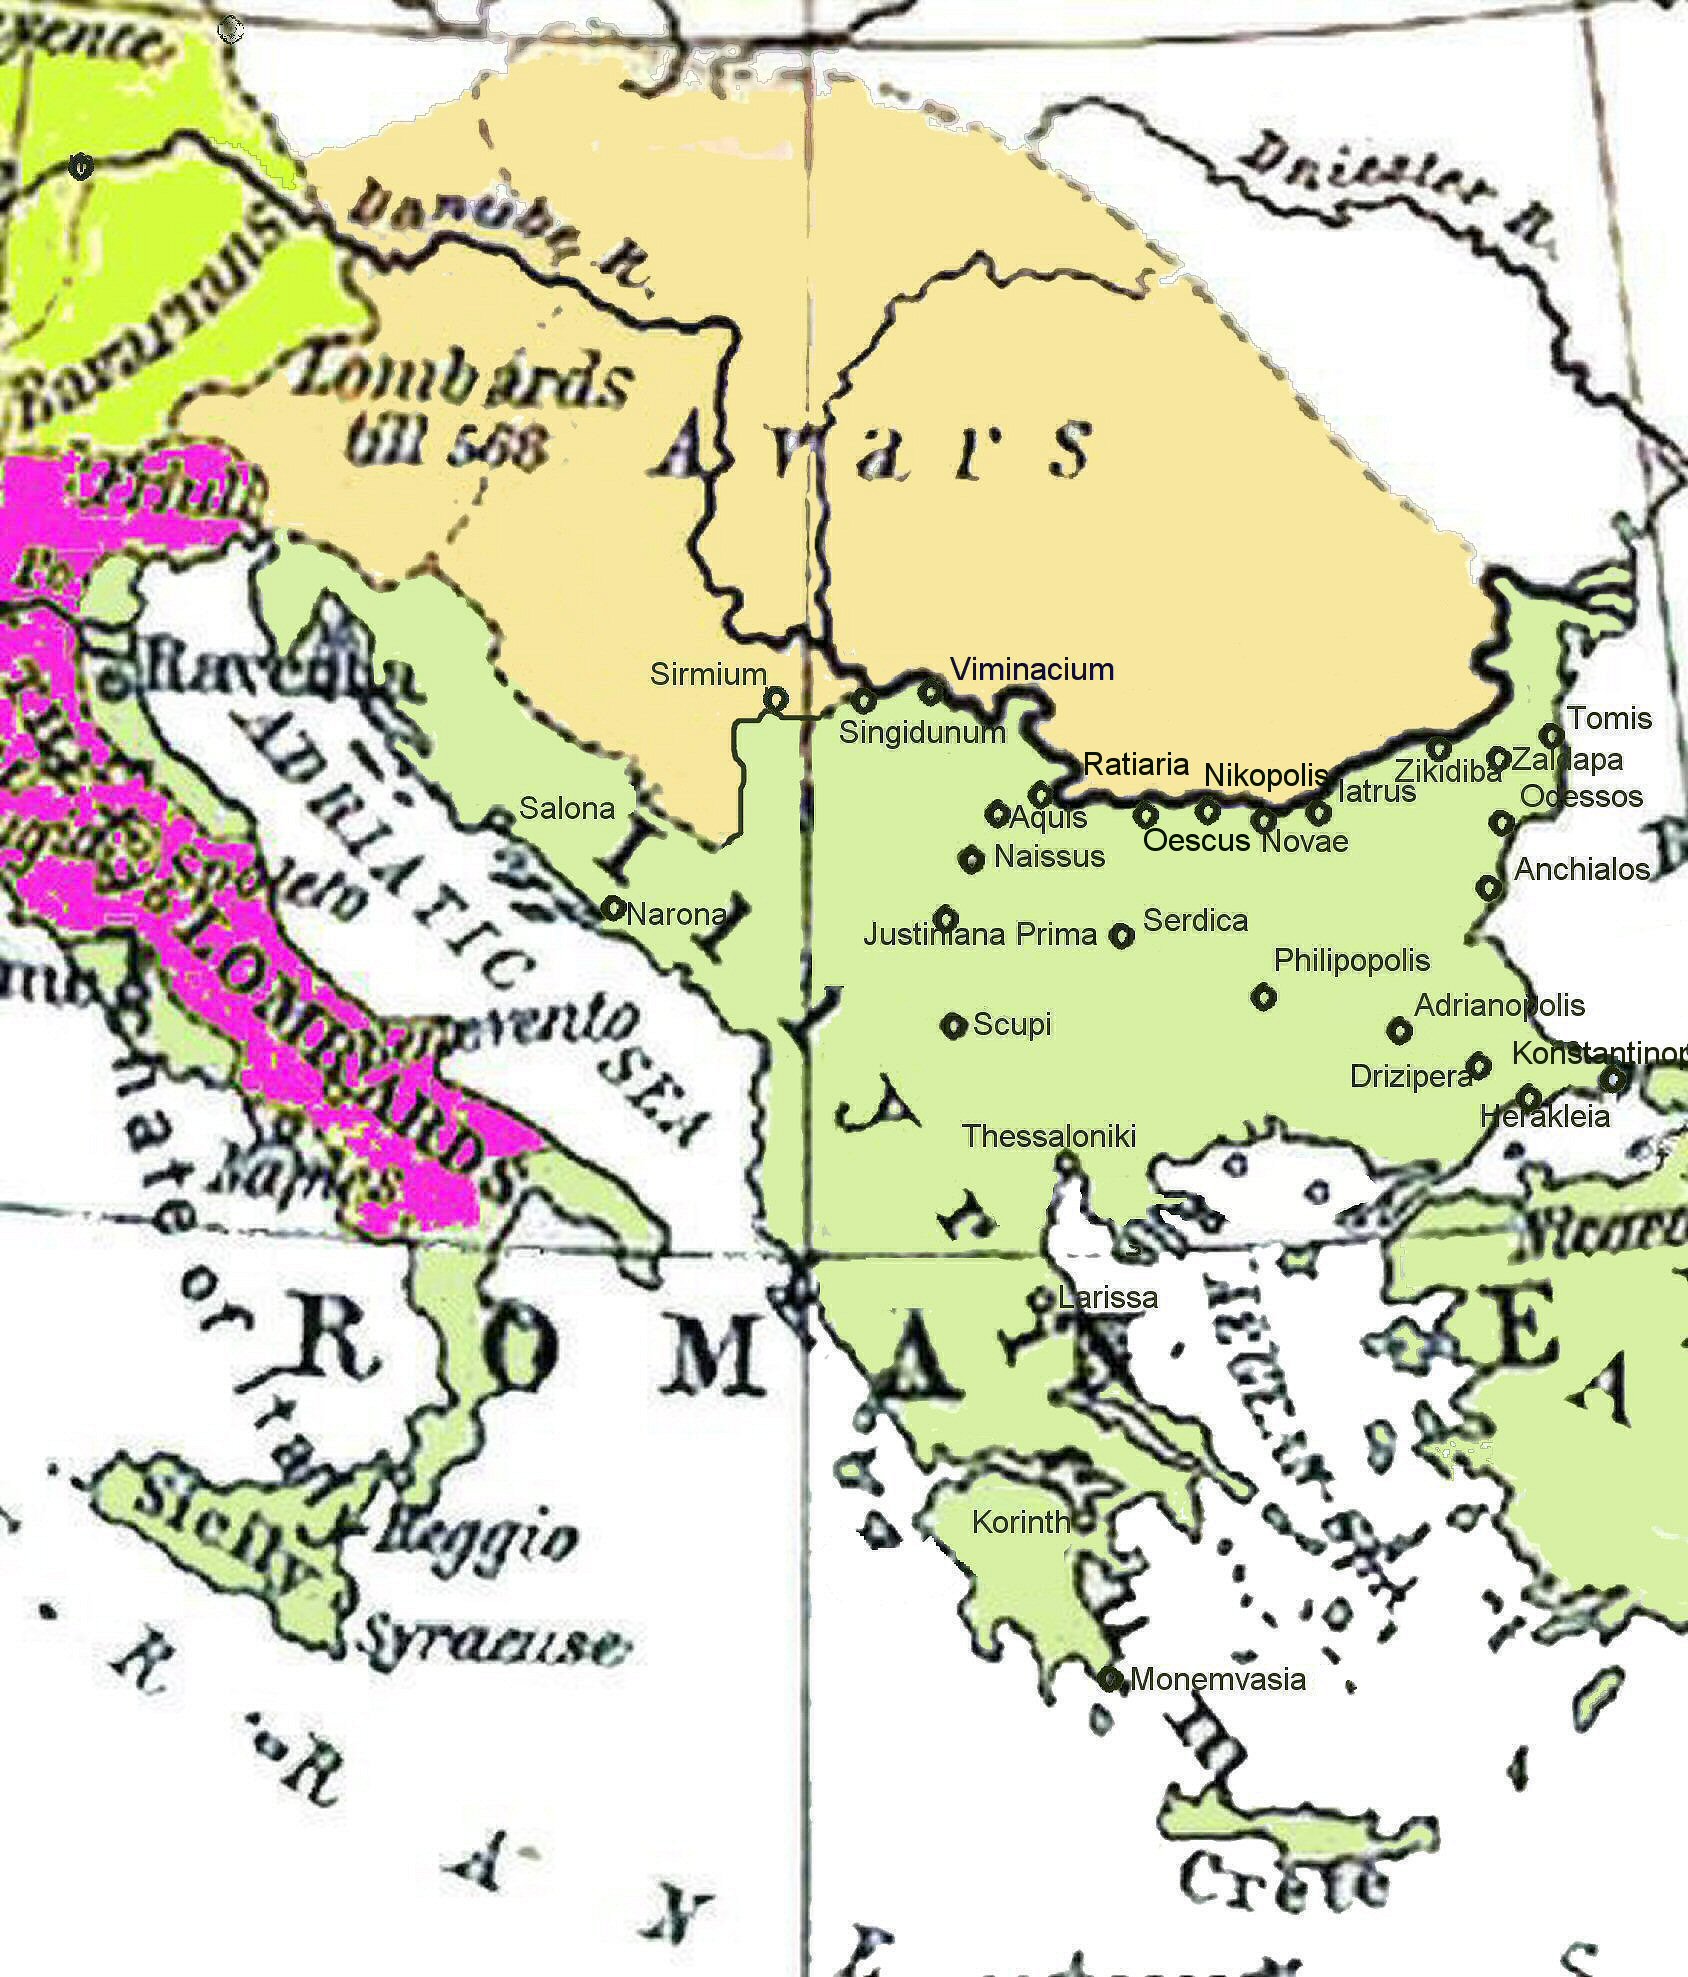 http://upload.wikimedia.org/wikipedia/commons/0/04/Historical_map_of_the_Balkans_around_582-612_AD.jpg